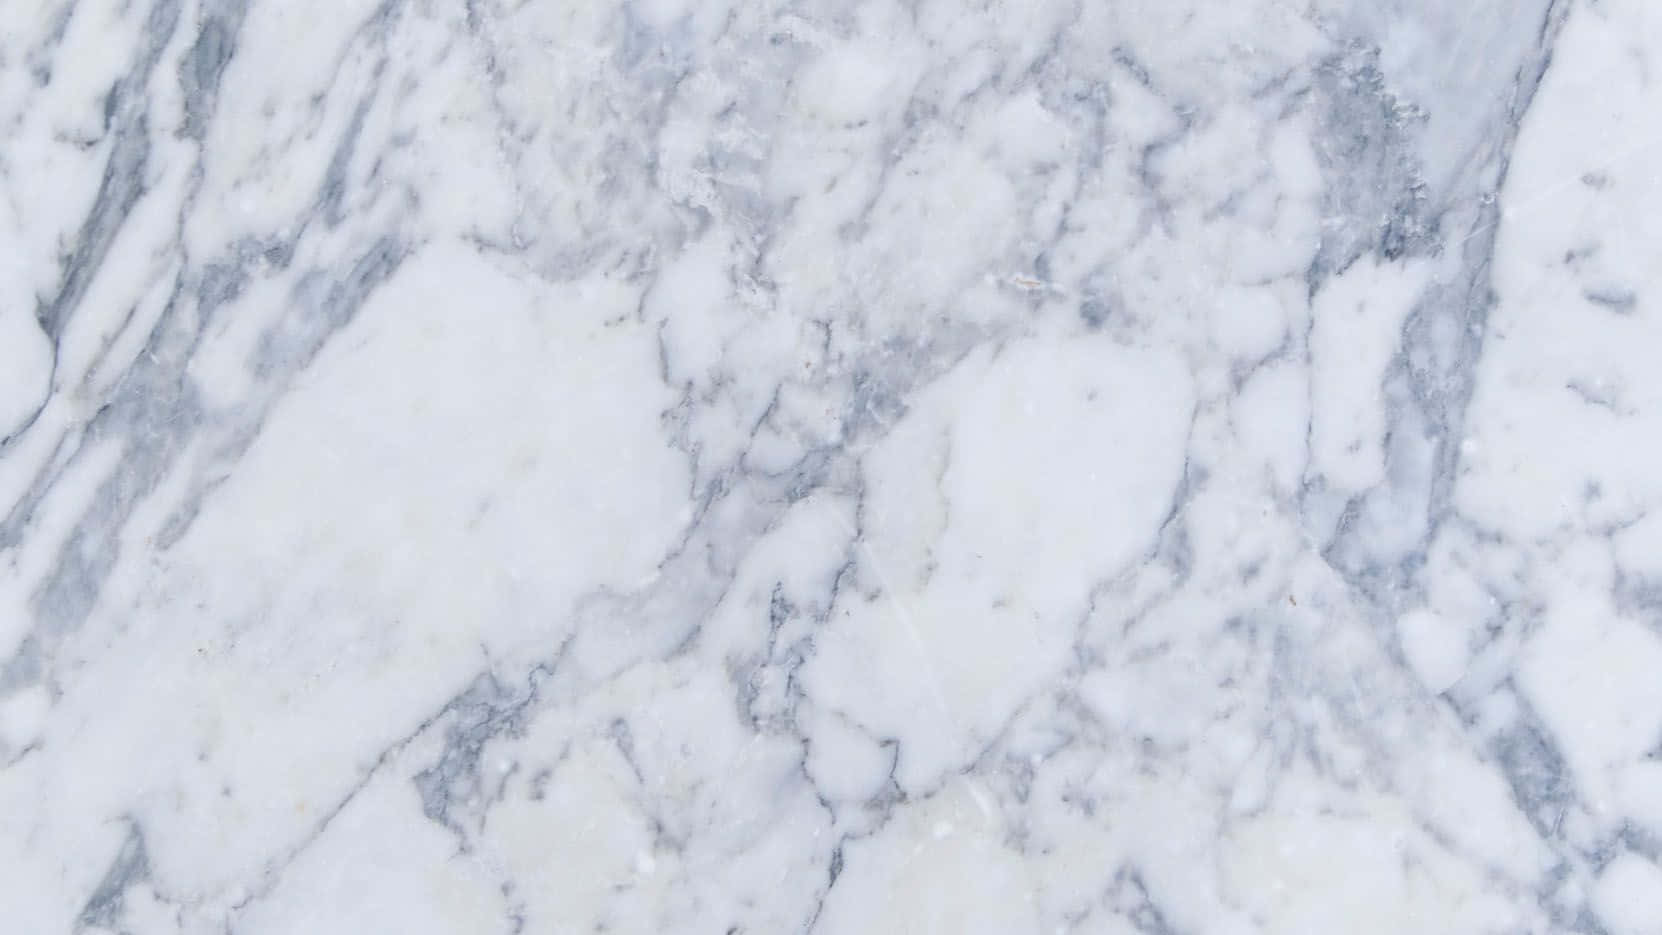 Stylish marble design for your Macbook laptop Wallpaper